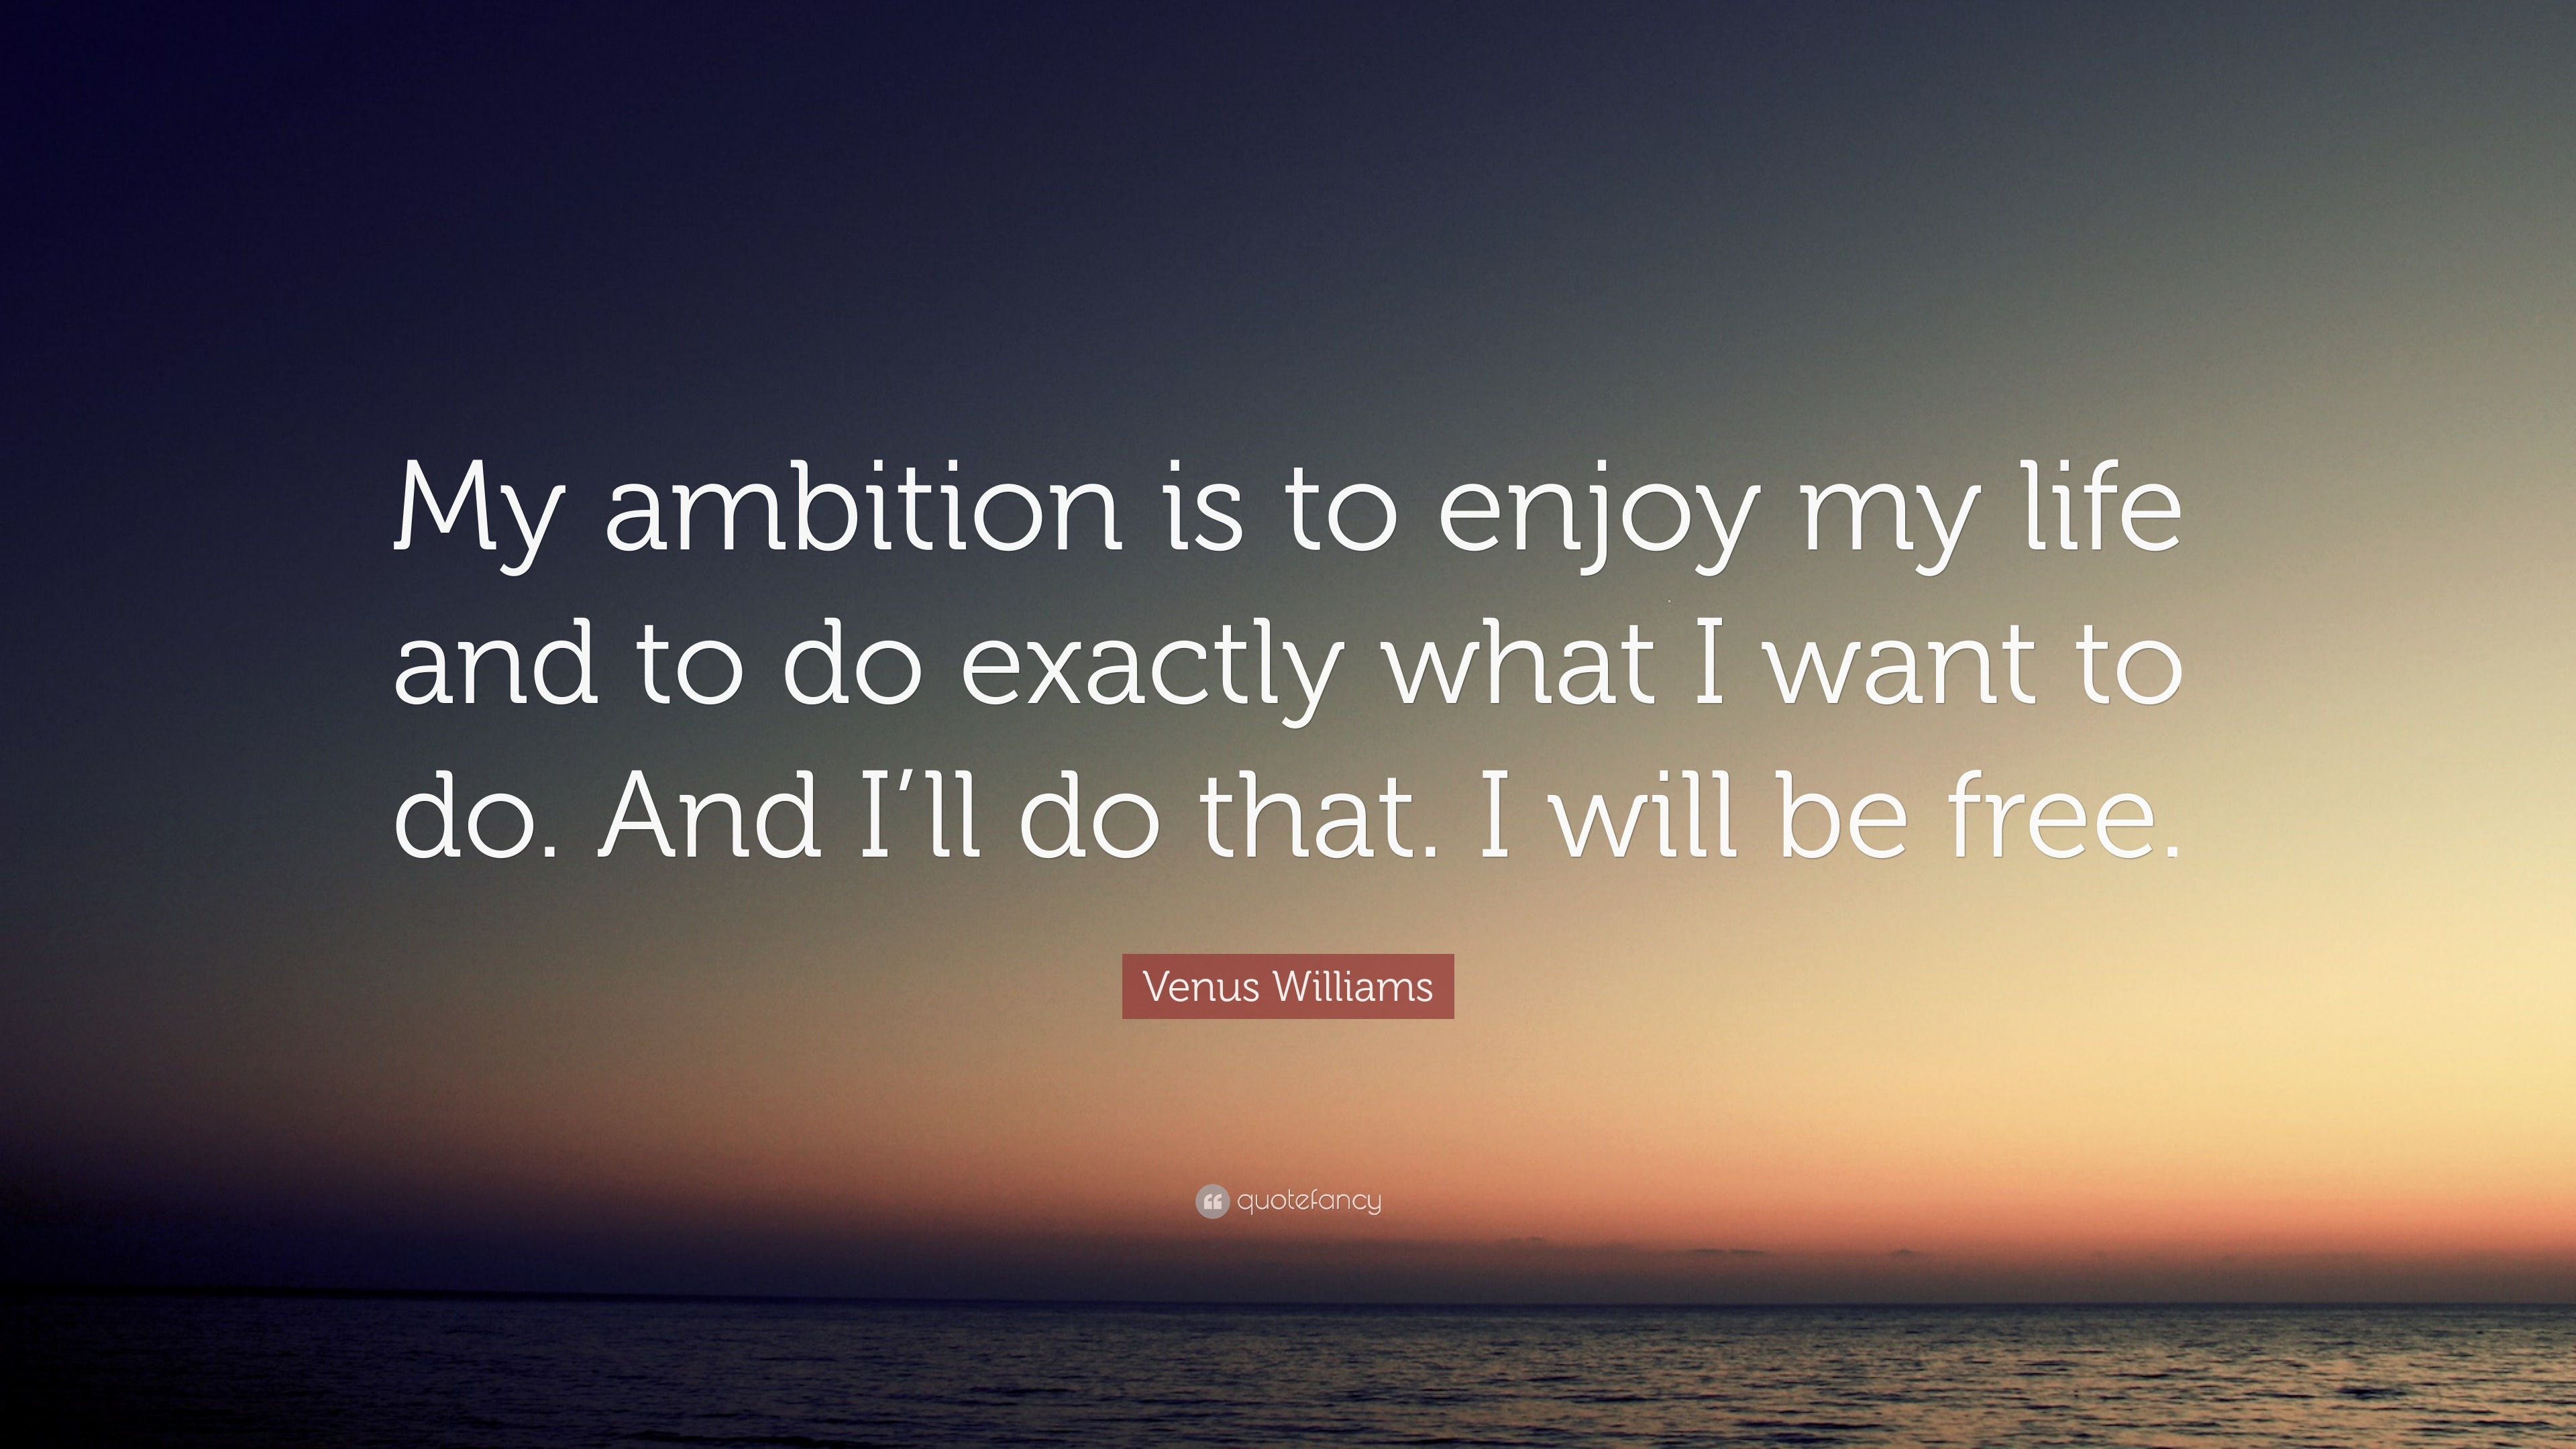 Venus Williams Quote “My ambition is to enjoy my life and to do exactly